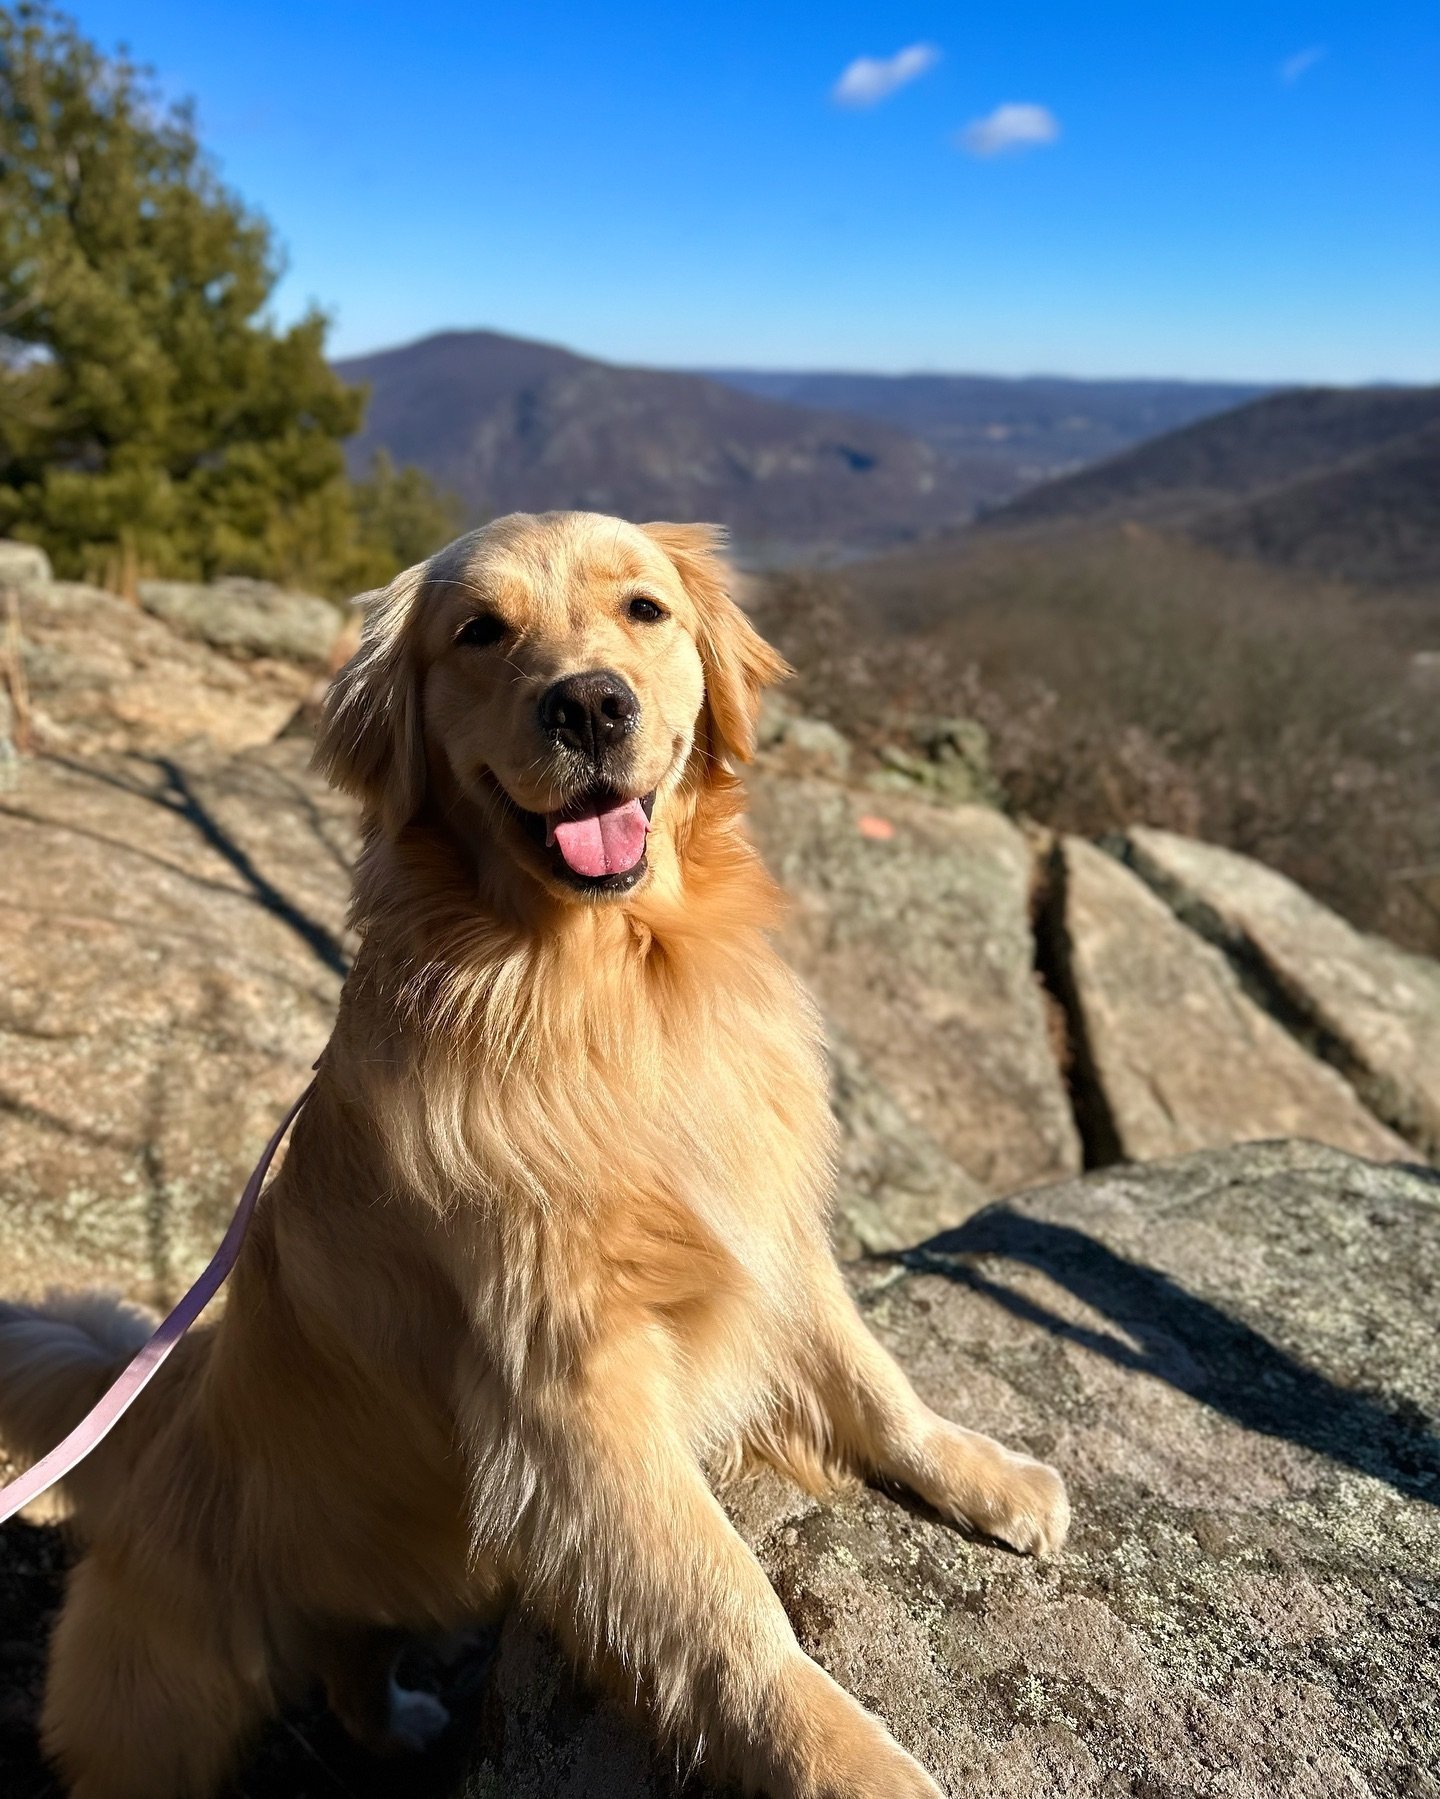 How it feels when you finally reach the summit ⛰️🐶

📷 : @havensgoldendays

#TriumphTogether #TriumphPack #TopOfTheMountain